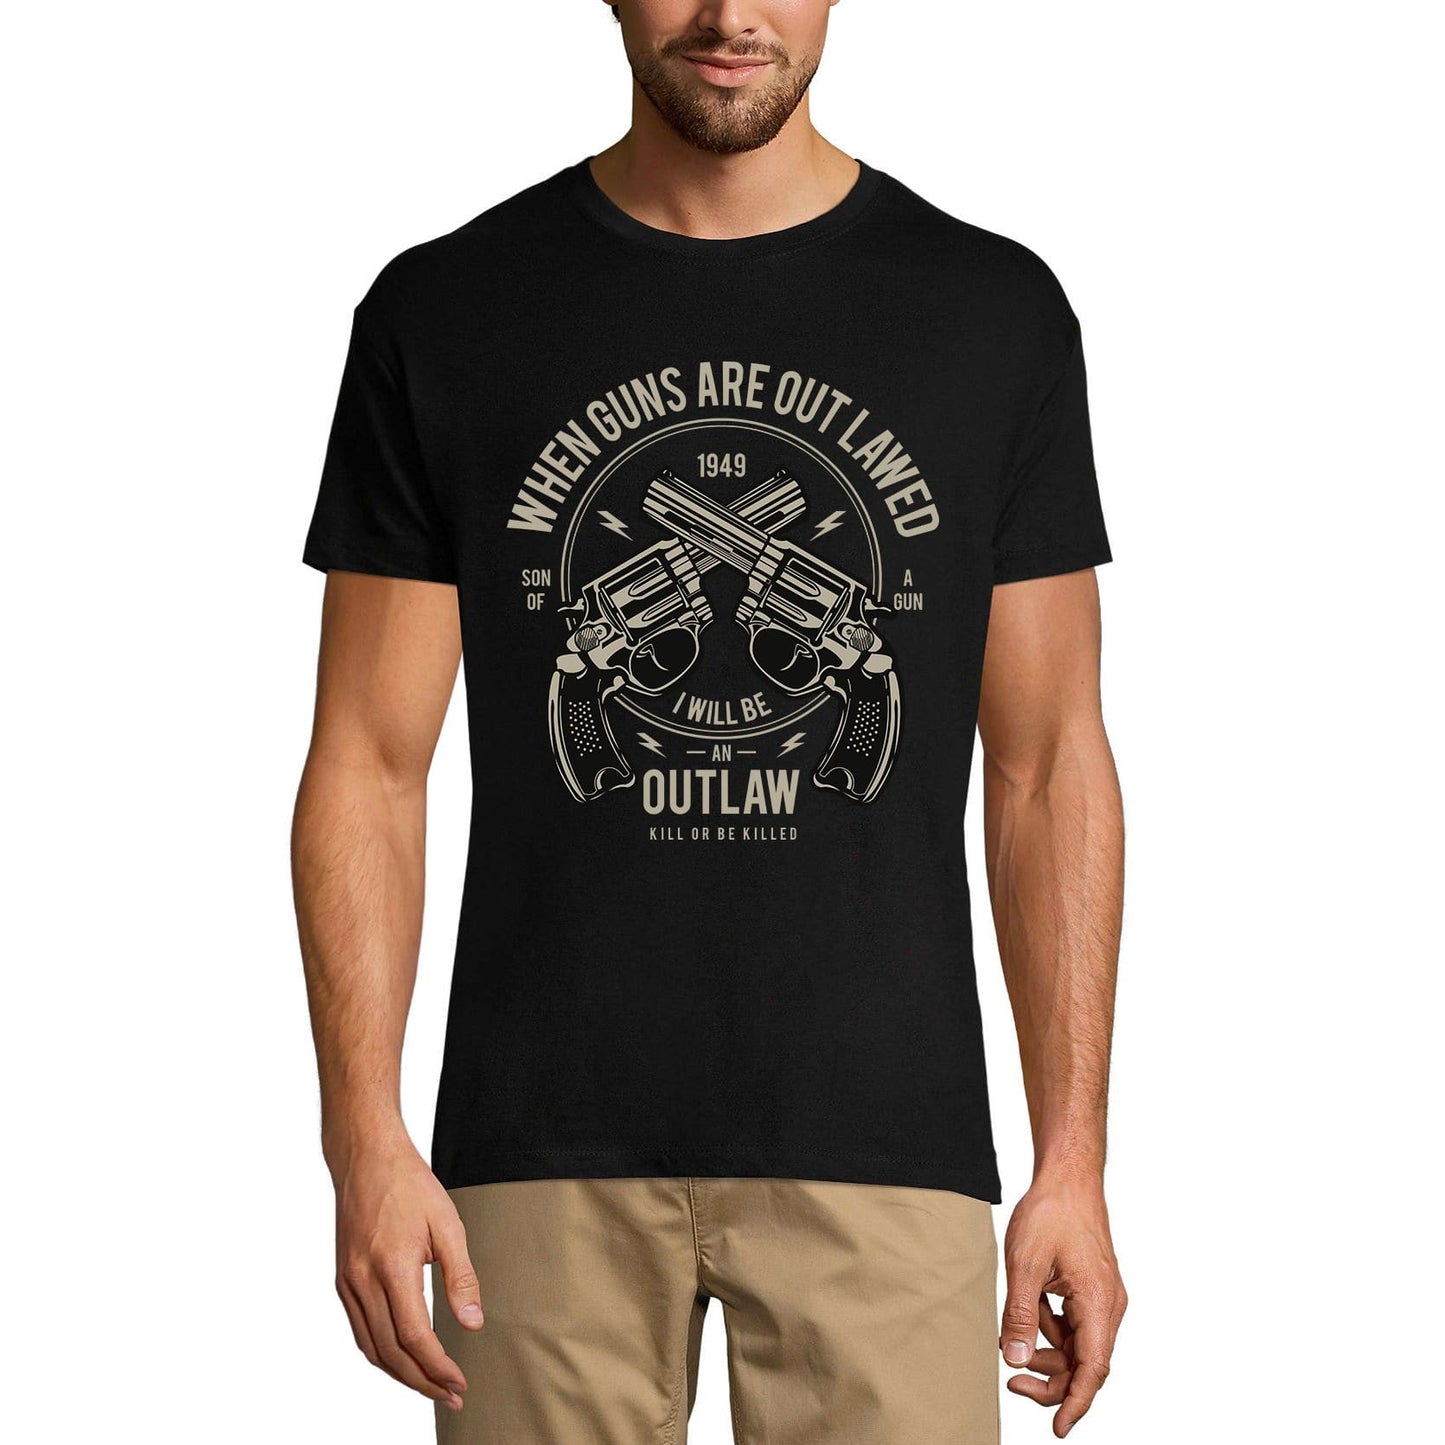 ULTRABASIC Men's T-Shirt When Guns are Out Lawed I Will Be an Outlaw - Funny Gun Tee Shirt